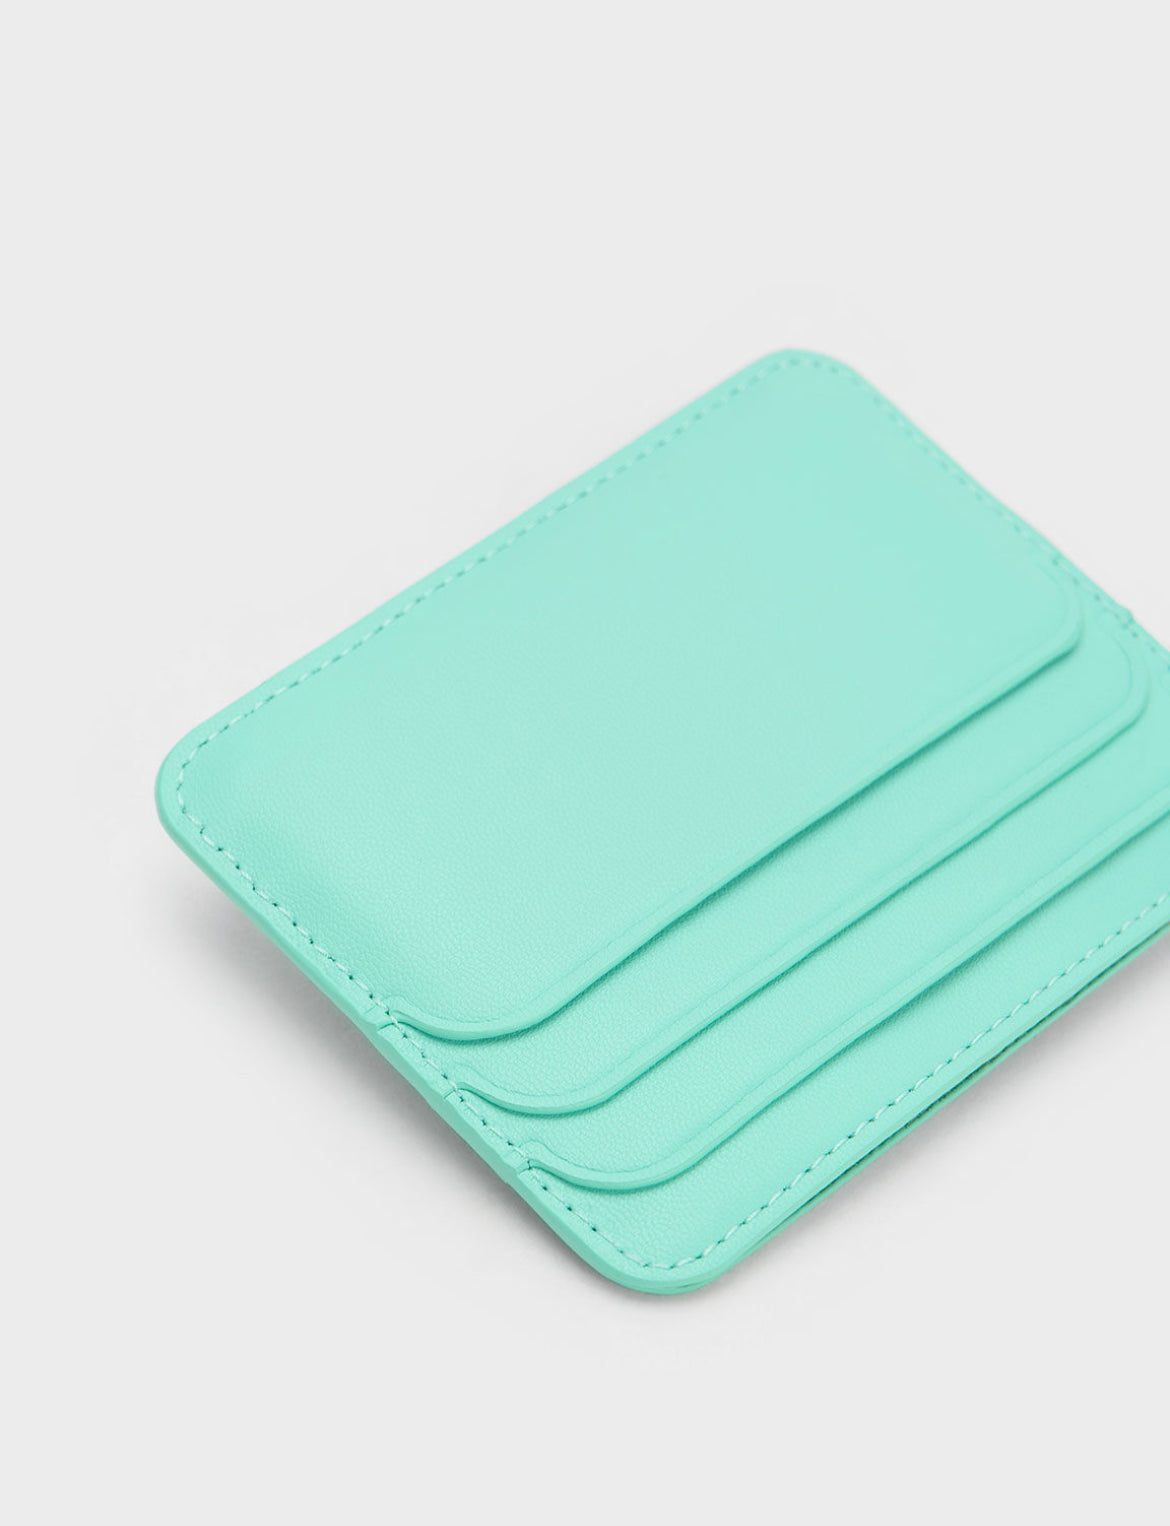 Cleo Quilted Card Holder - Mint Green